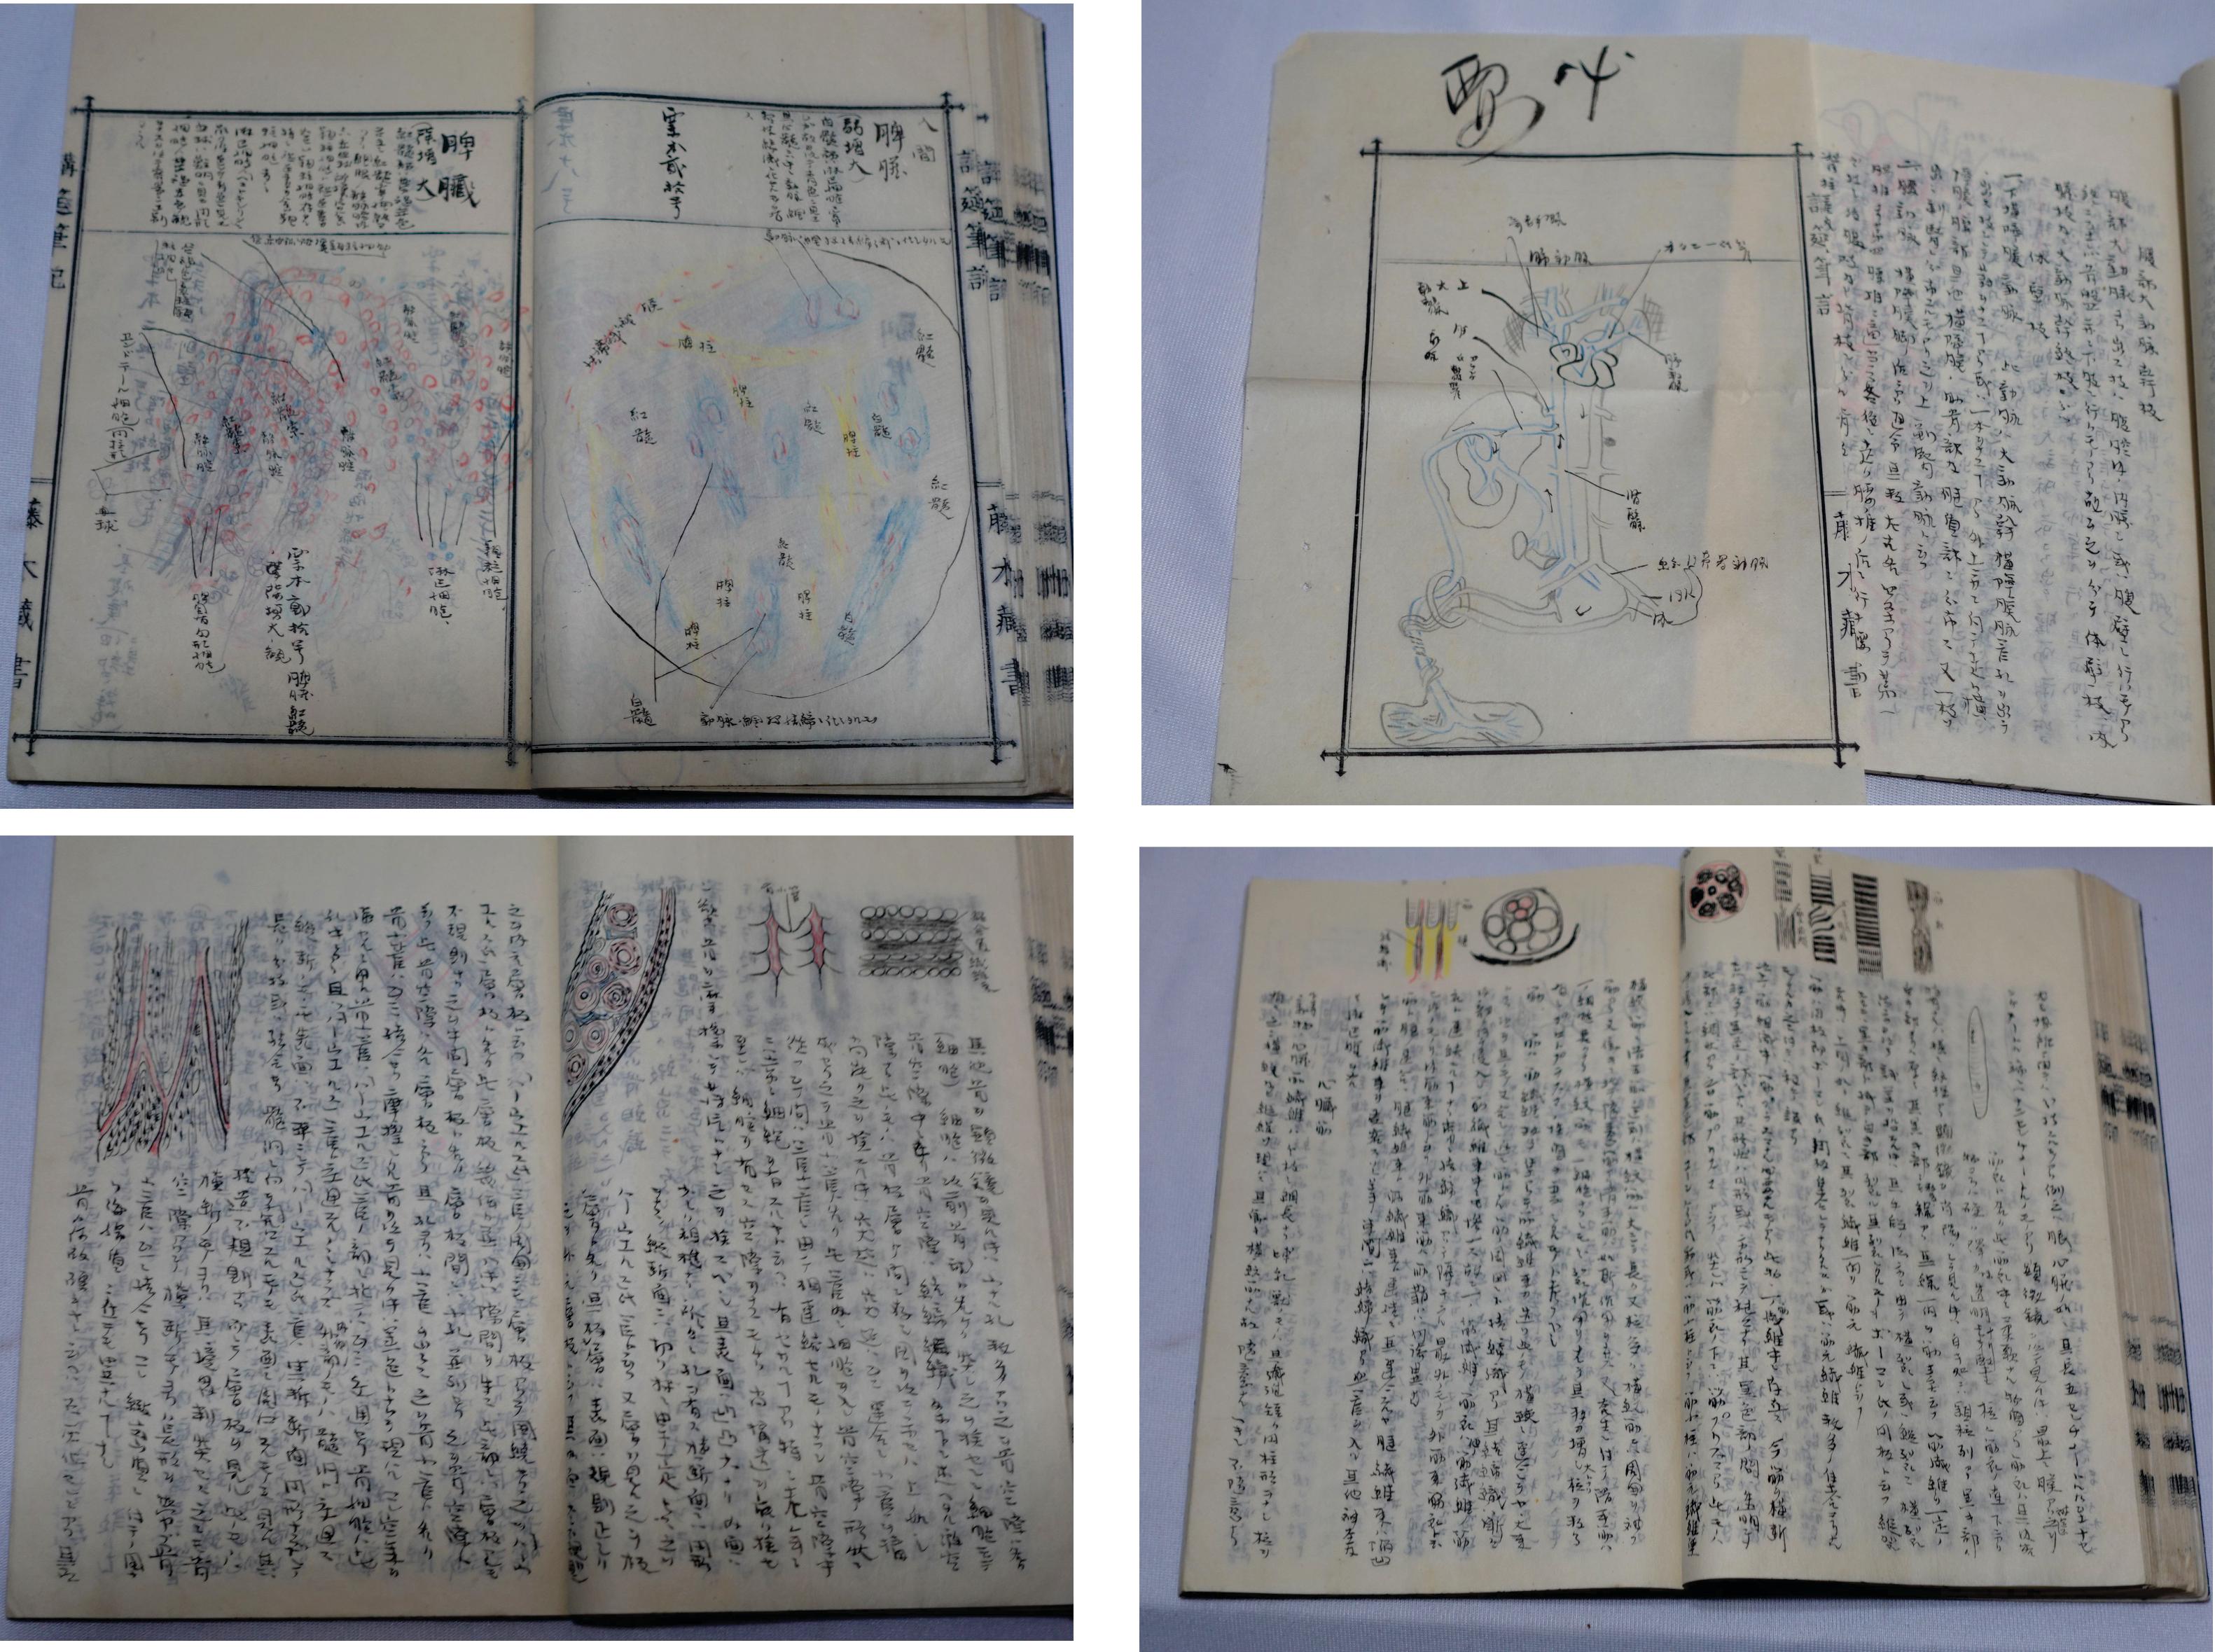 Early 20th Century Medicine Manuscript Koyto Imperial University-Collection Lecture Notebook 1900 For Sale